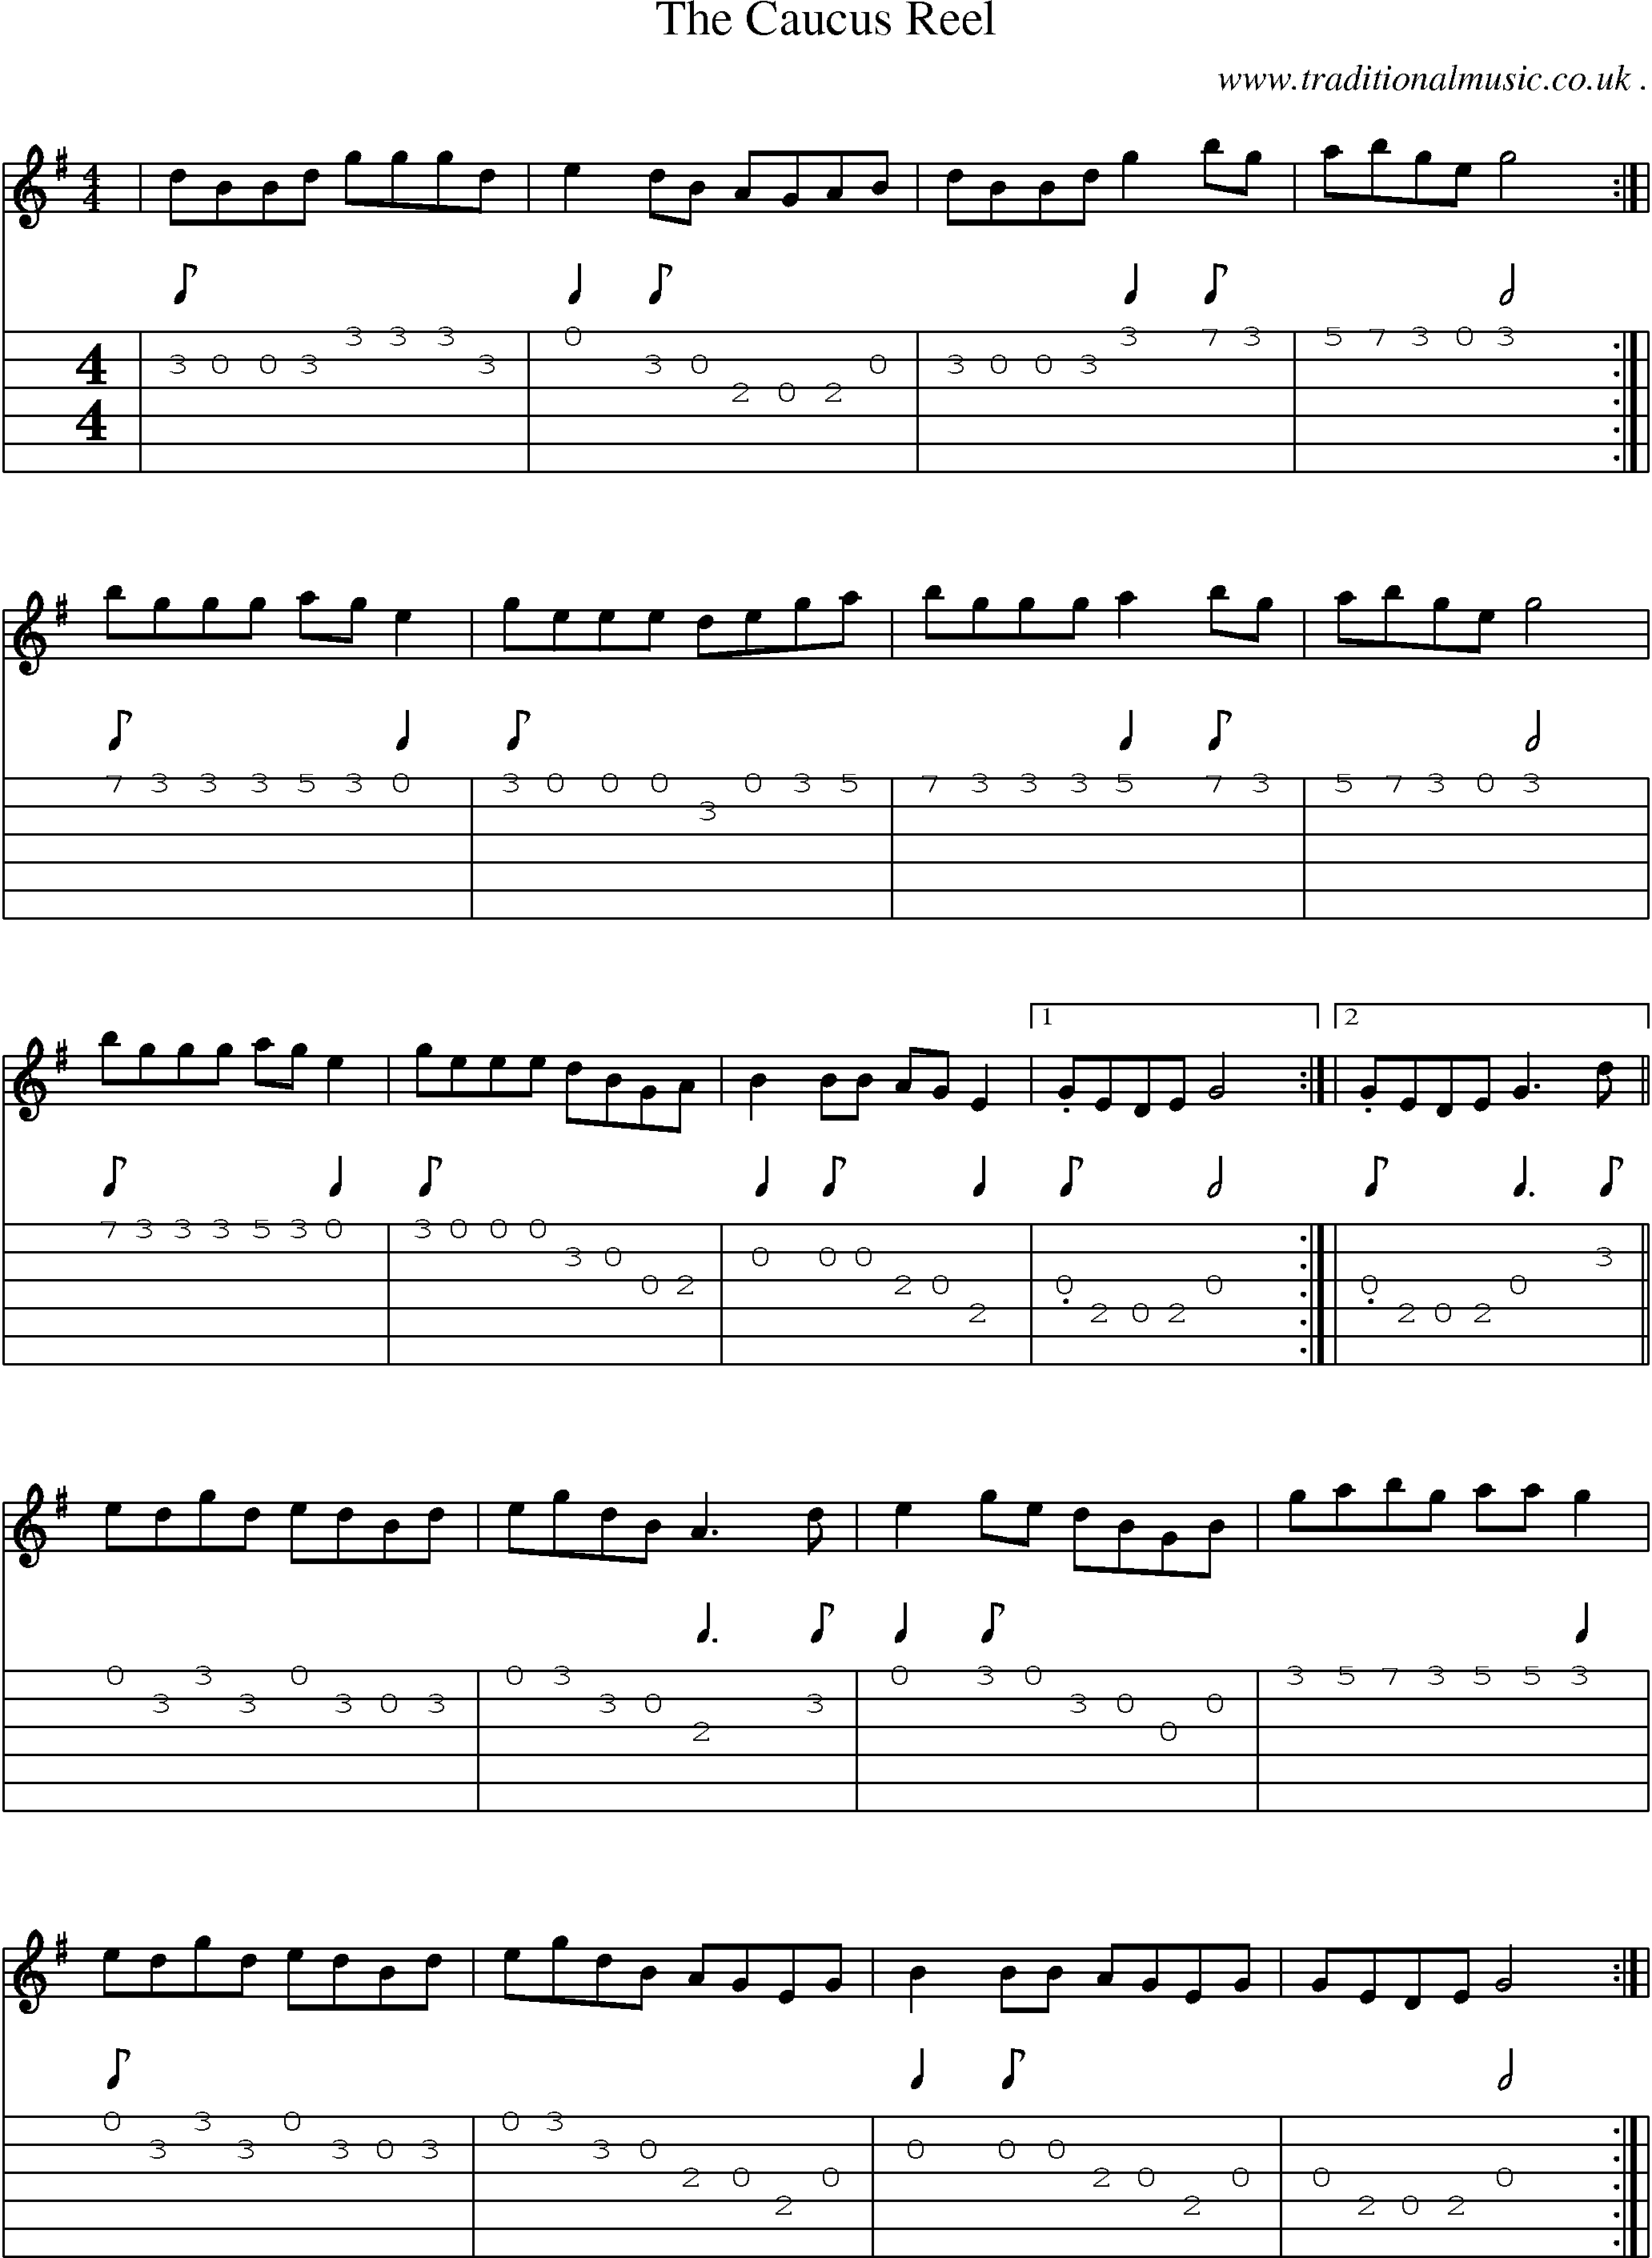 Sheet-Music and Guitar Tabs for The Caucus Reel